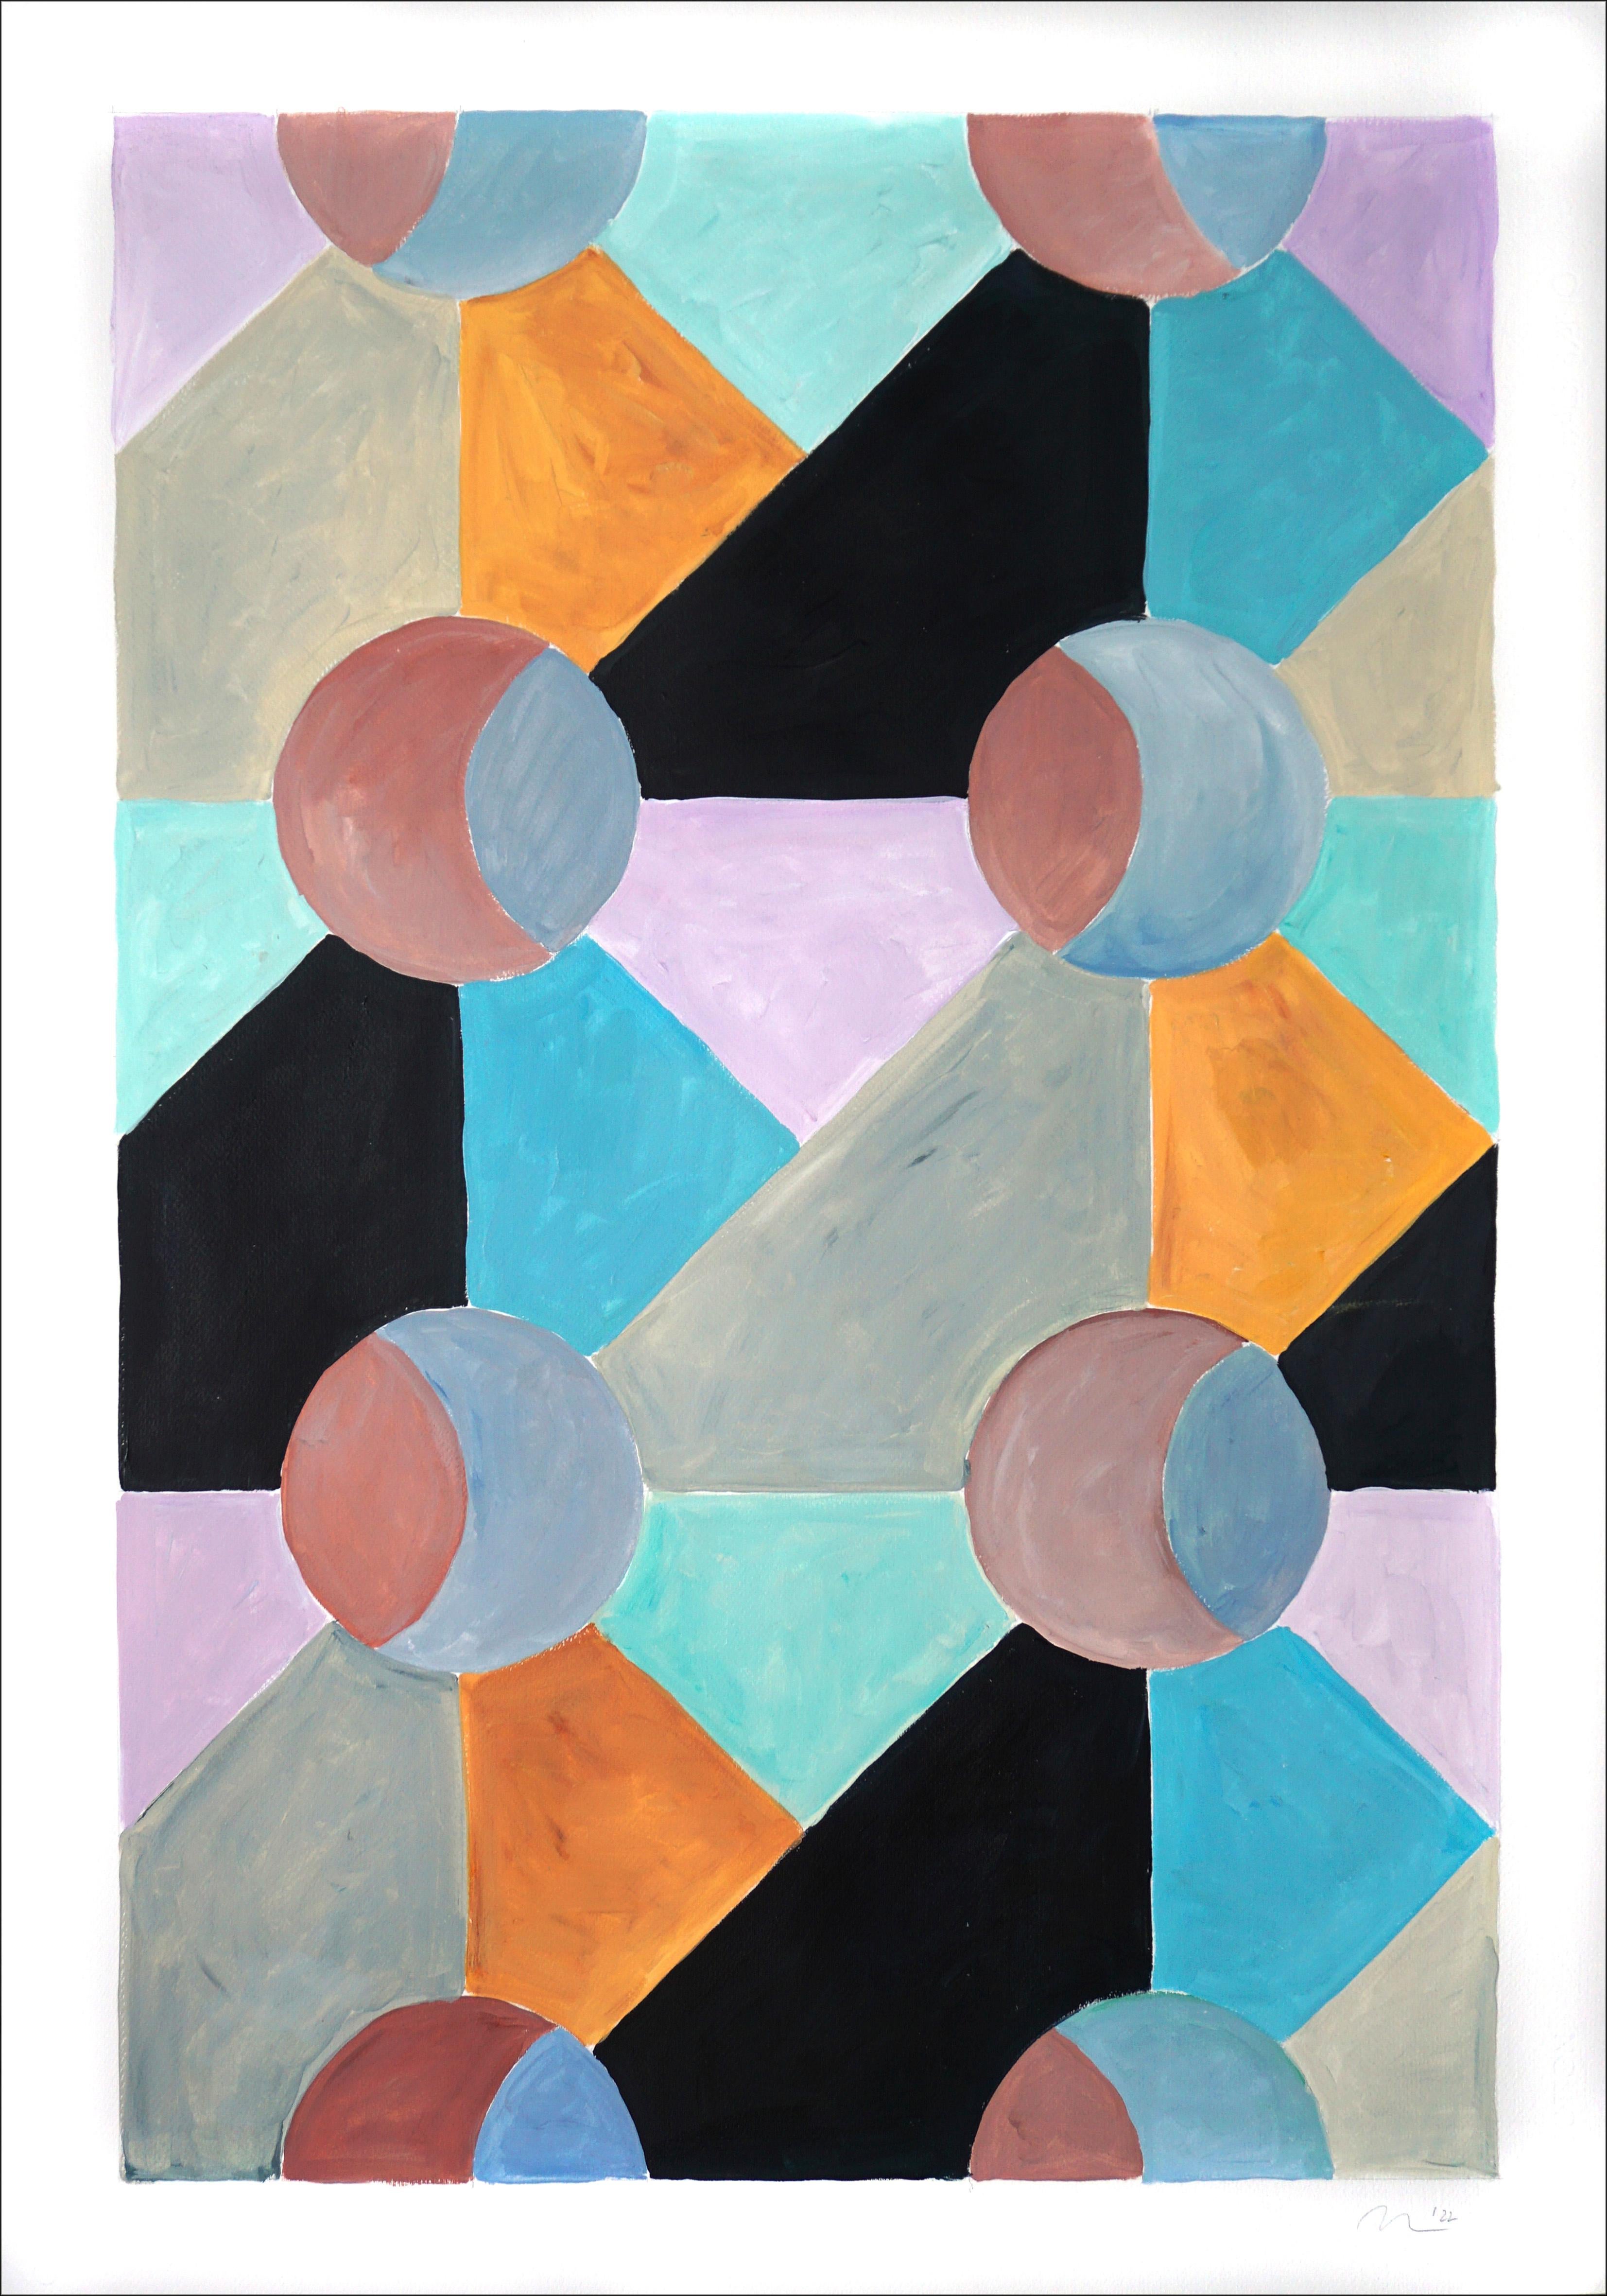 Natalia Roman Abstract Painting - Modernist Glass Window, Cold Blue and Mauve Pastel Geometric Patterns, Surreal